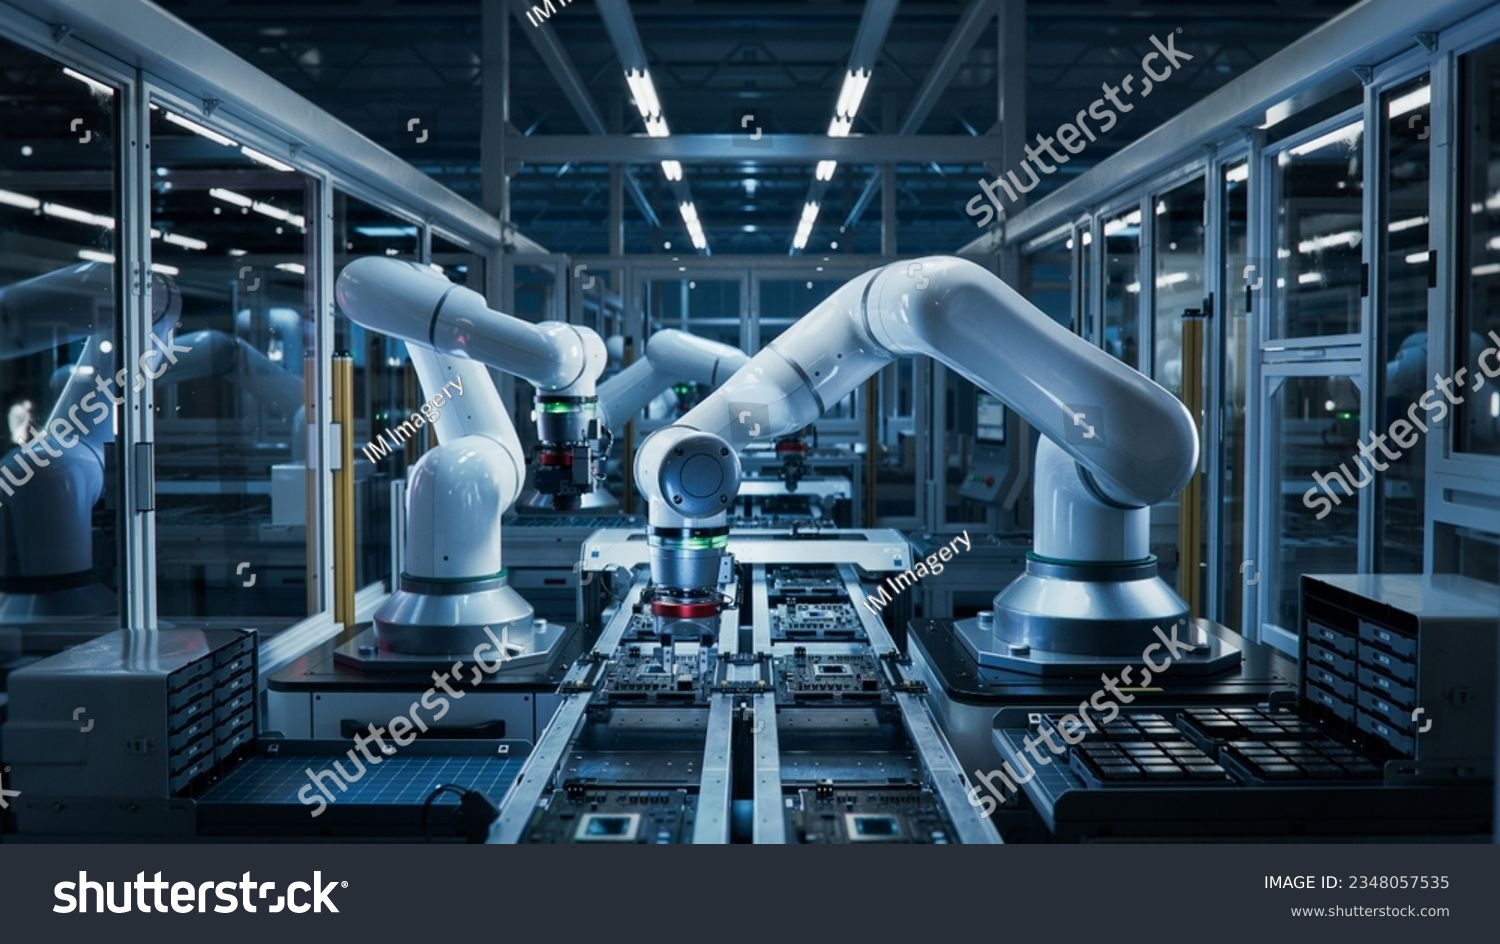 Manufacturing Automation. Advanced High Precision Robot Arms on Automated PCB Assembly Line Inside Modern Electronics Factory. Electronic Devices Production Industry. Component Installation Process. #2348057535